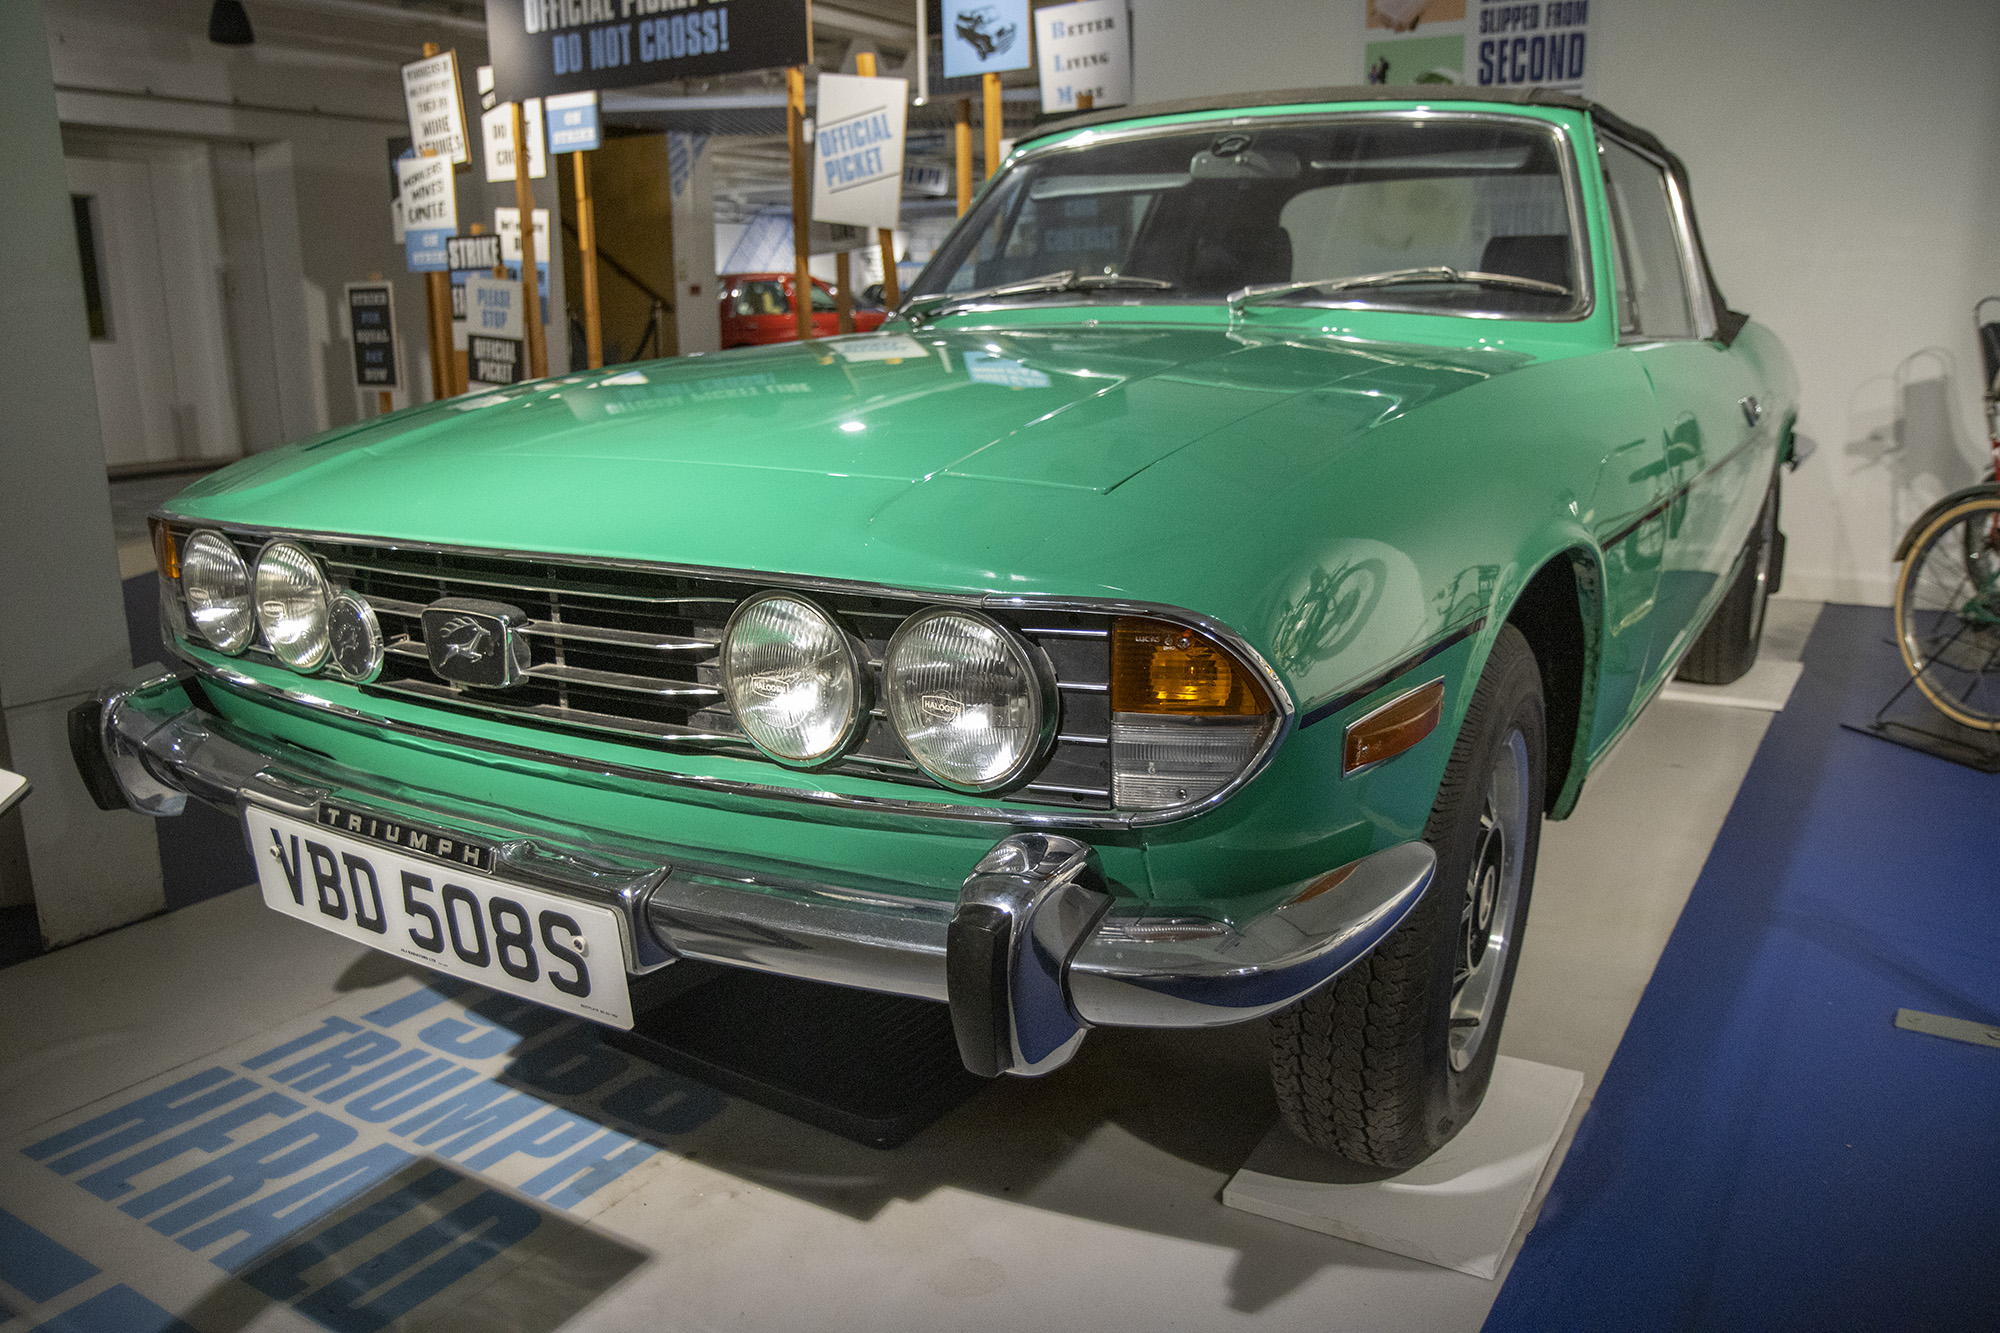 A green Triumph Stag on display in Coventry Transport Museum, in front of a model picket line that visitors can walk through.